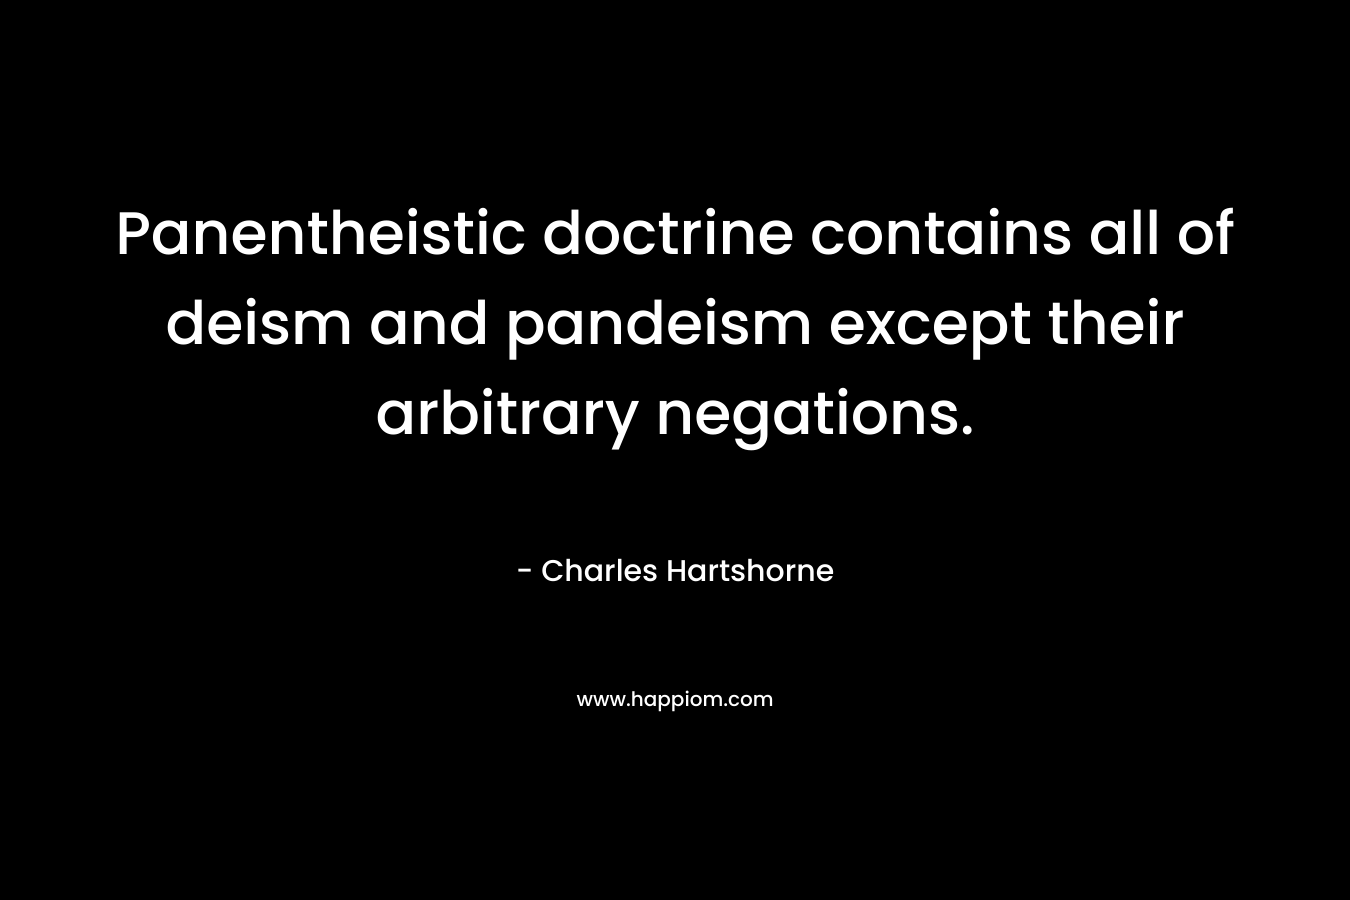 Panentheistic doctrine contains all of deism and pandeism except their arbitrary negations.